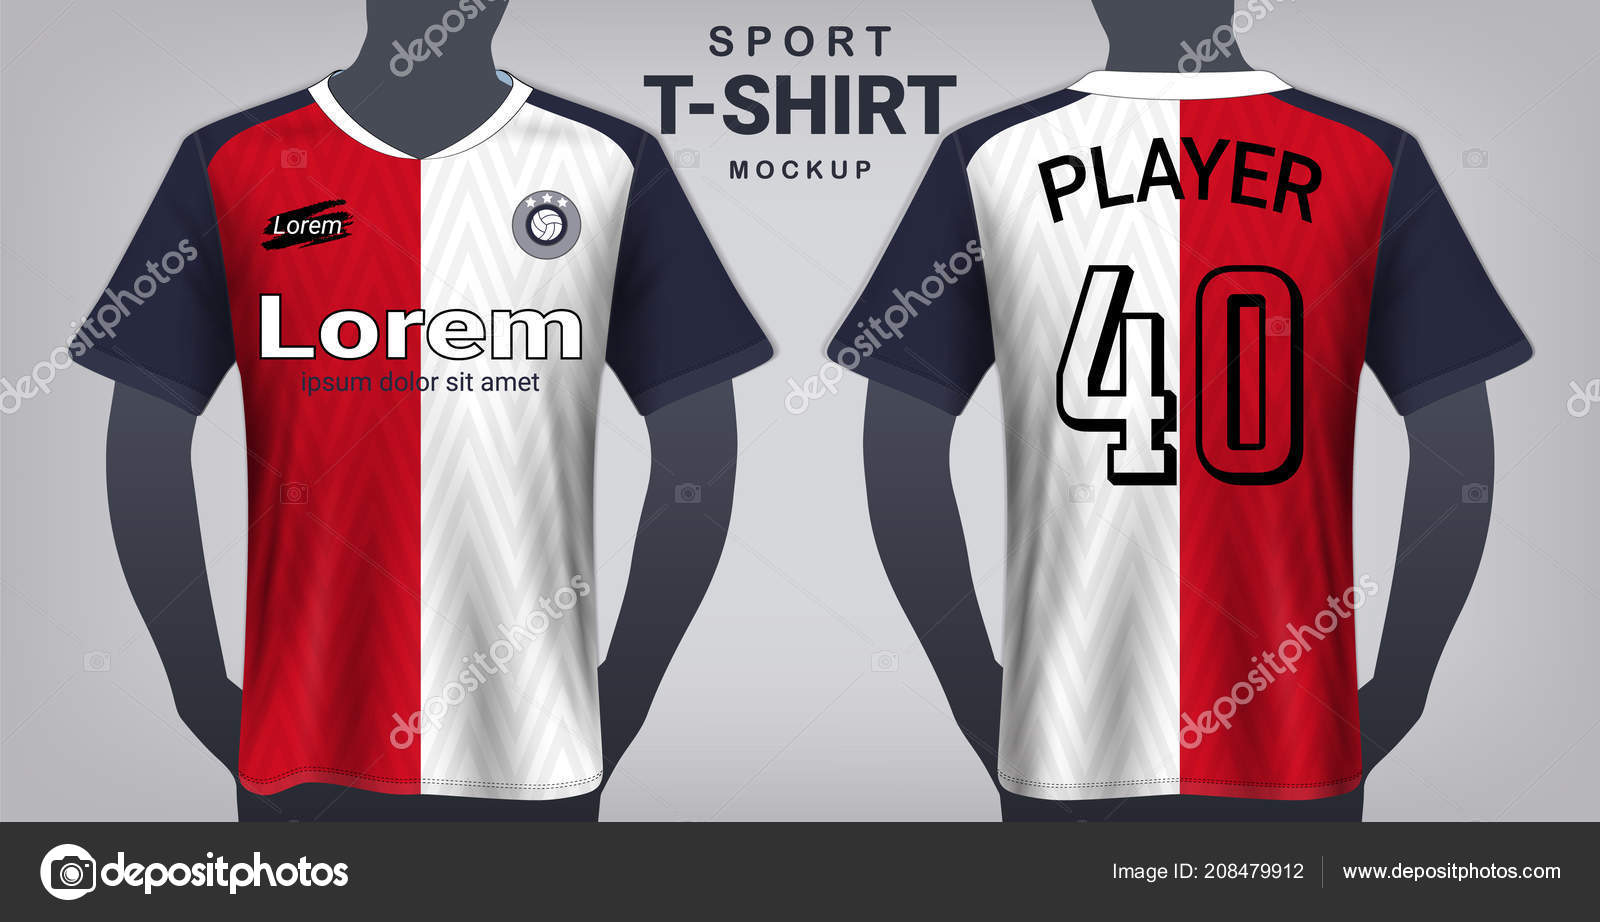 Download Soccer Jersey Sport Shirt Mockup Template Realistic Graphic Design Front Vector Image By C Aioonrak Gmail Com Vector Stock 208479912